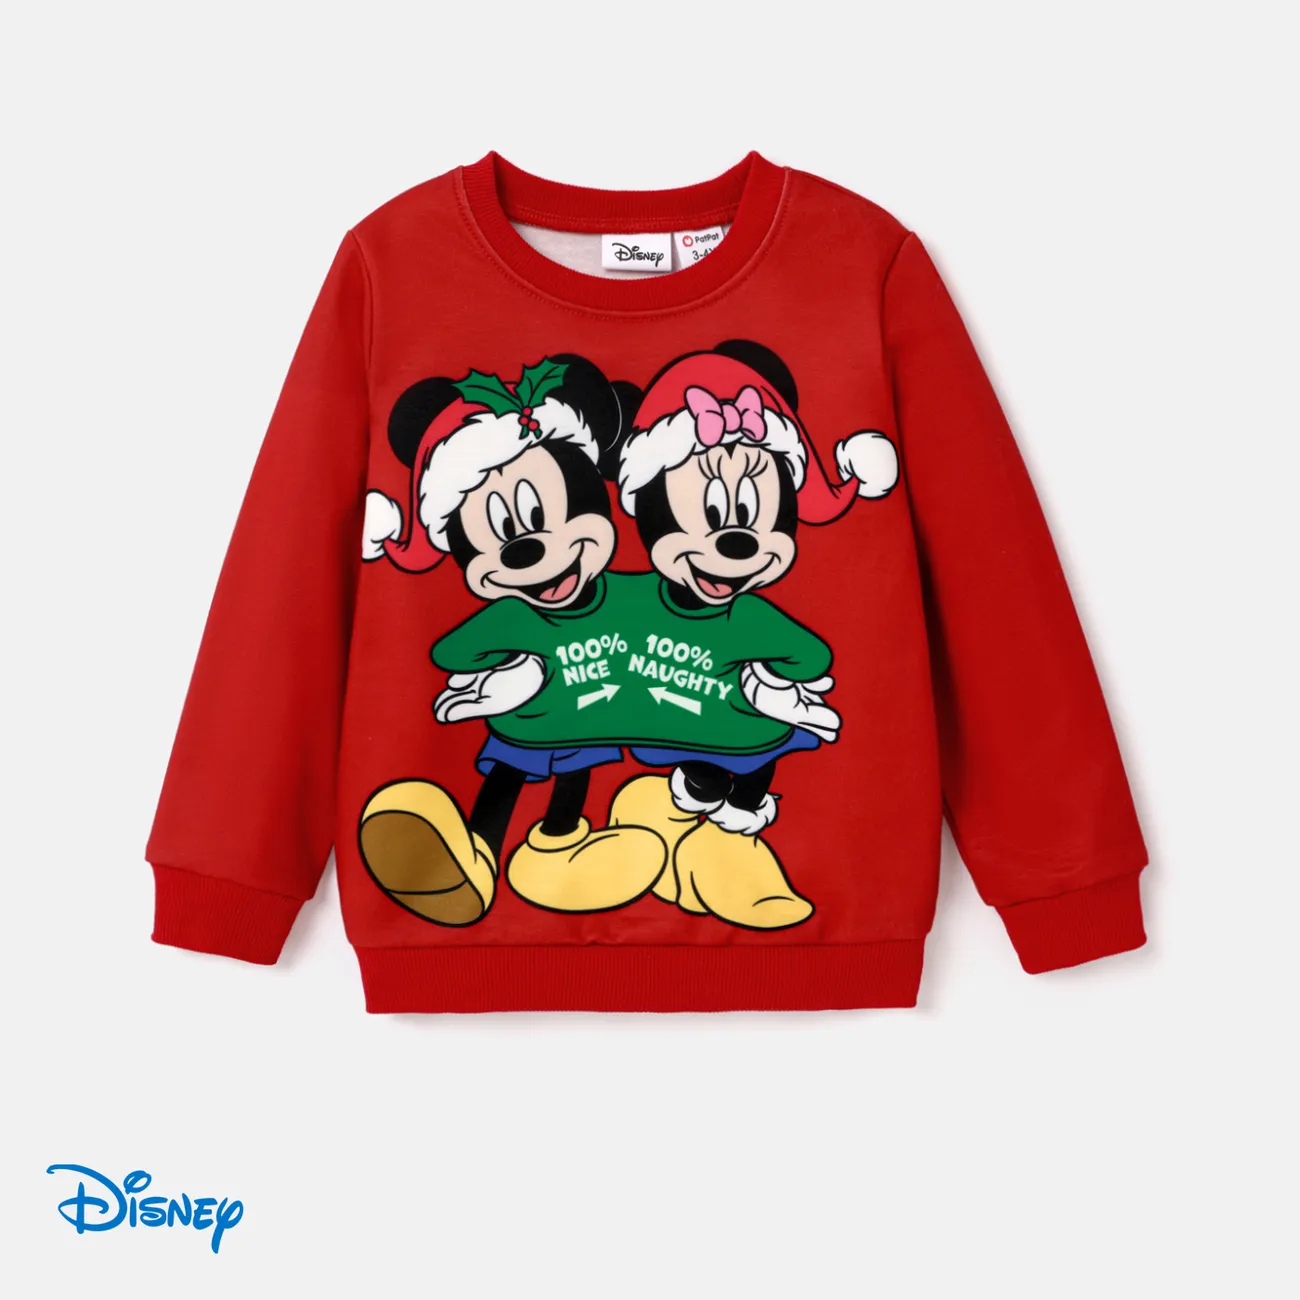 Disney Mickey and Friends Family Matching Christmas Character Print Sweatshirt Red big image 1